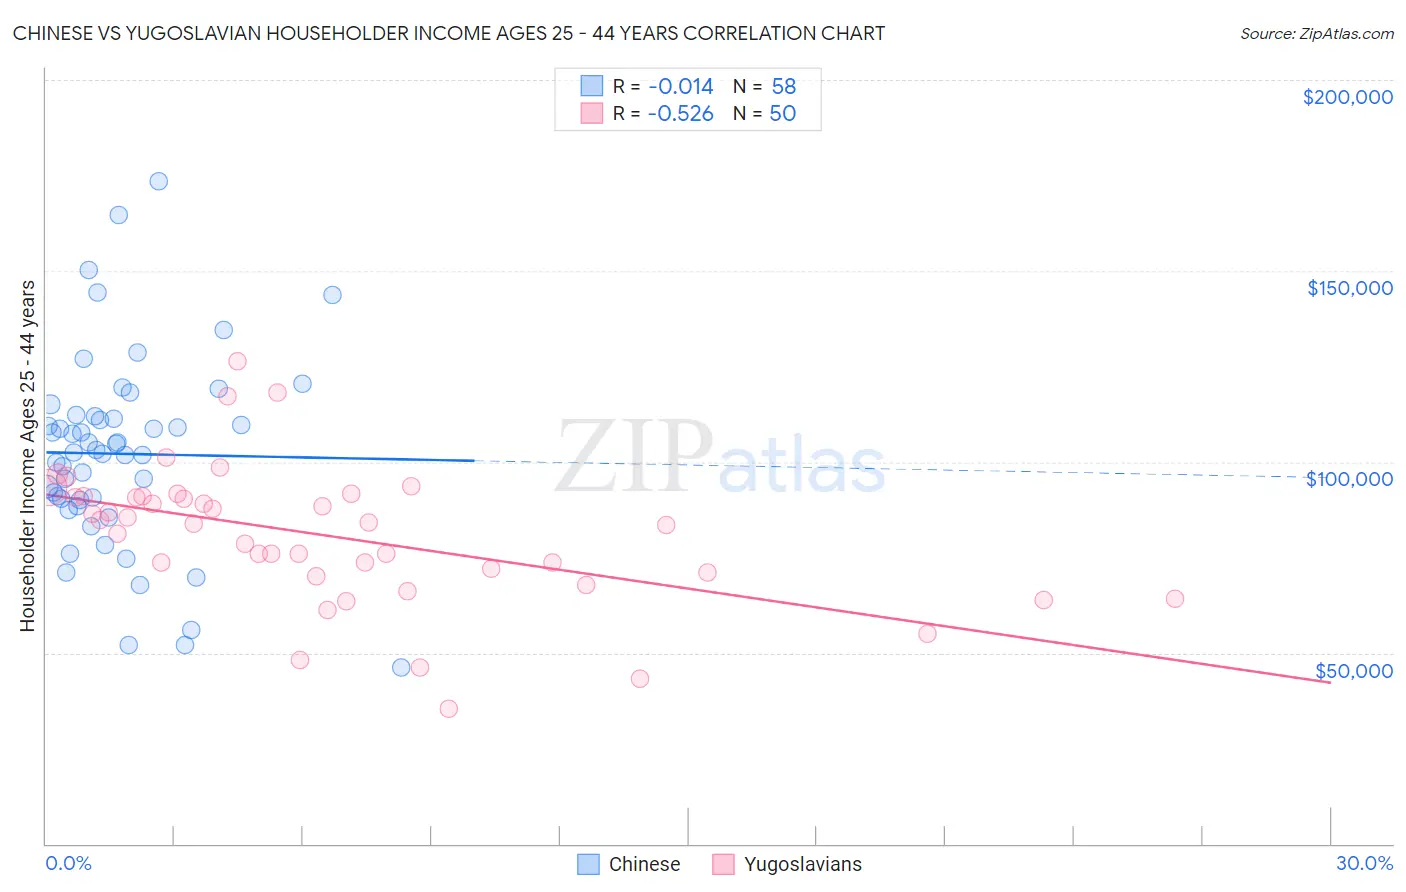 Chinese vs Yugoslavian Householder Income Ages 25 - 44 years